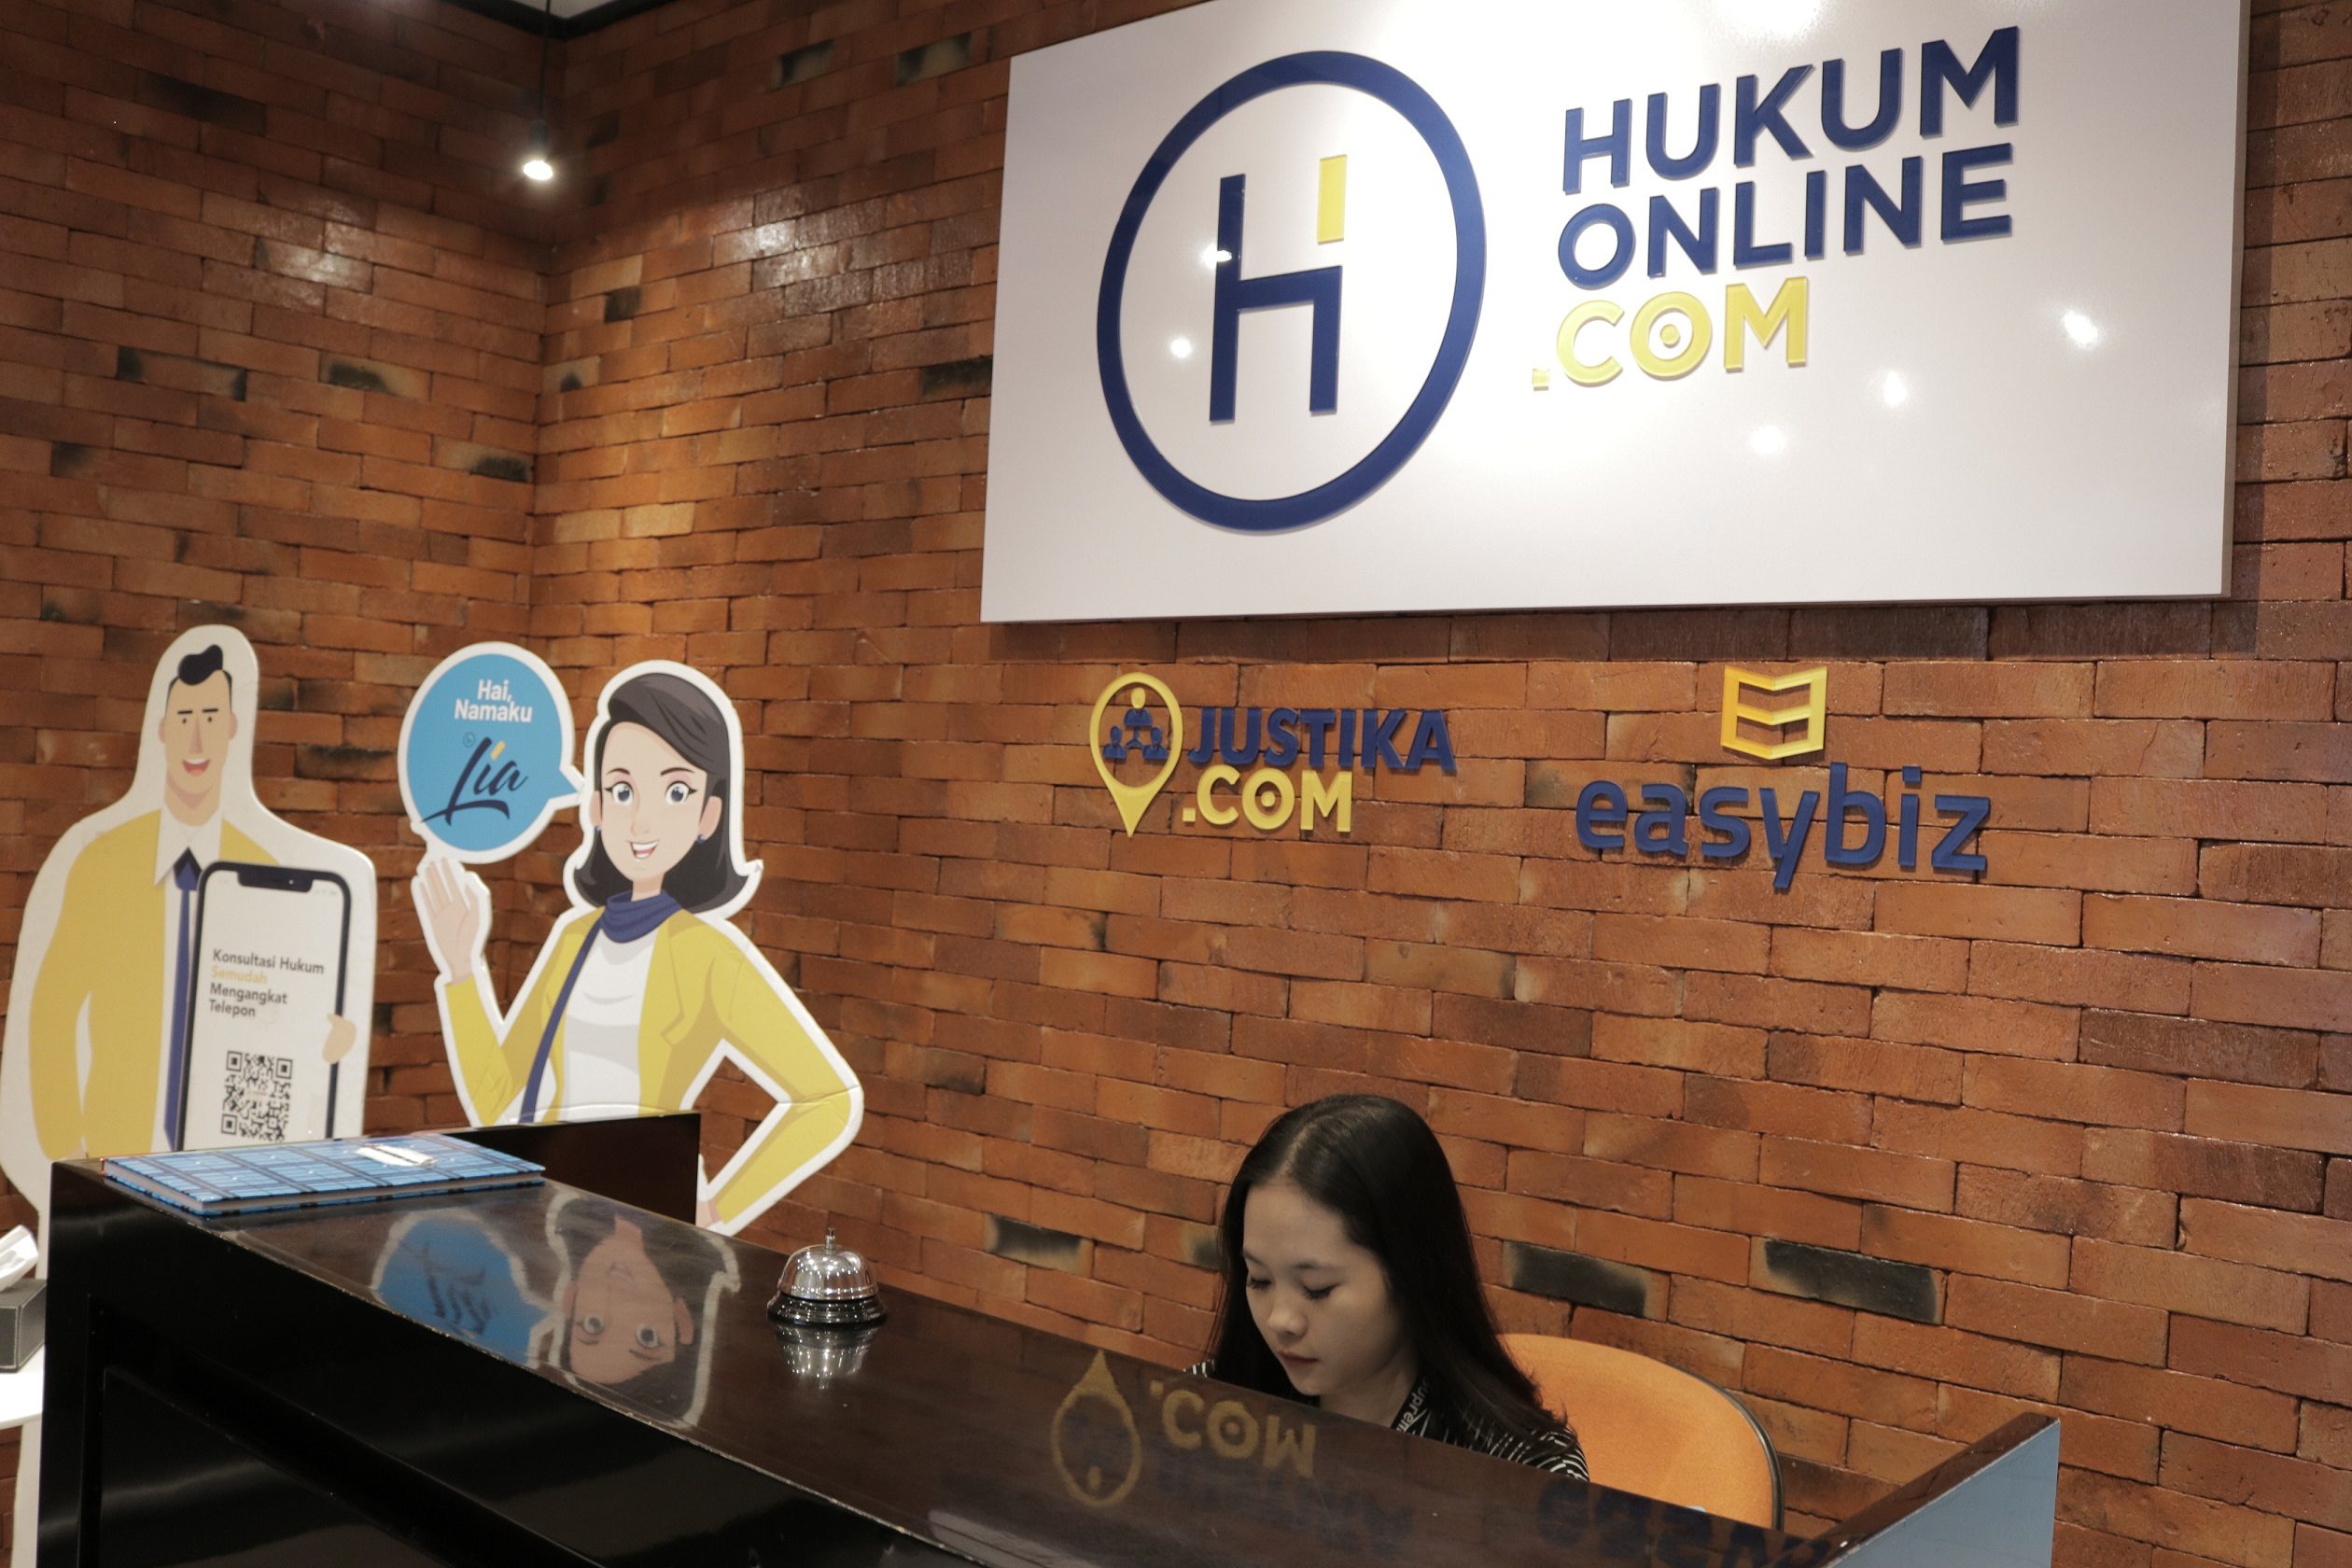 Indonesia Digest: SOSV invests in Arkademi; Hukumonline bags Series A